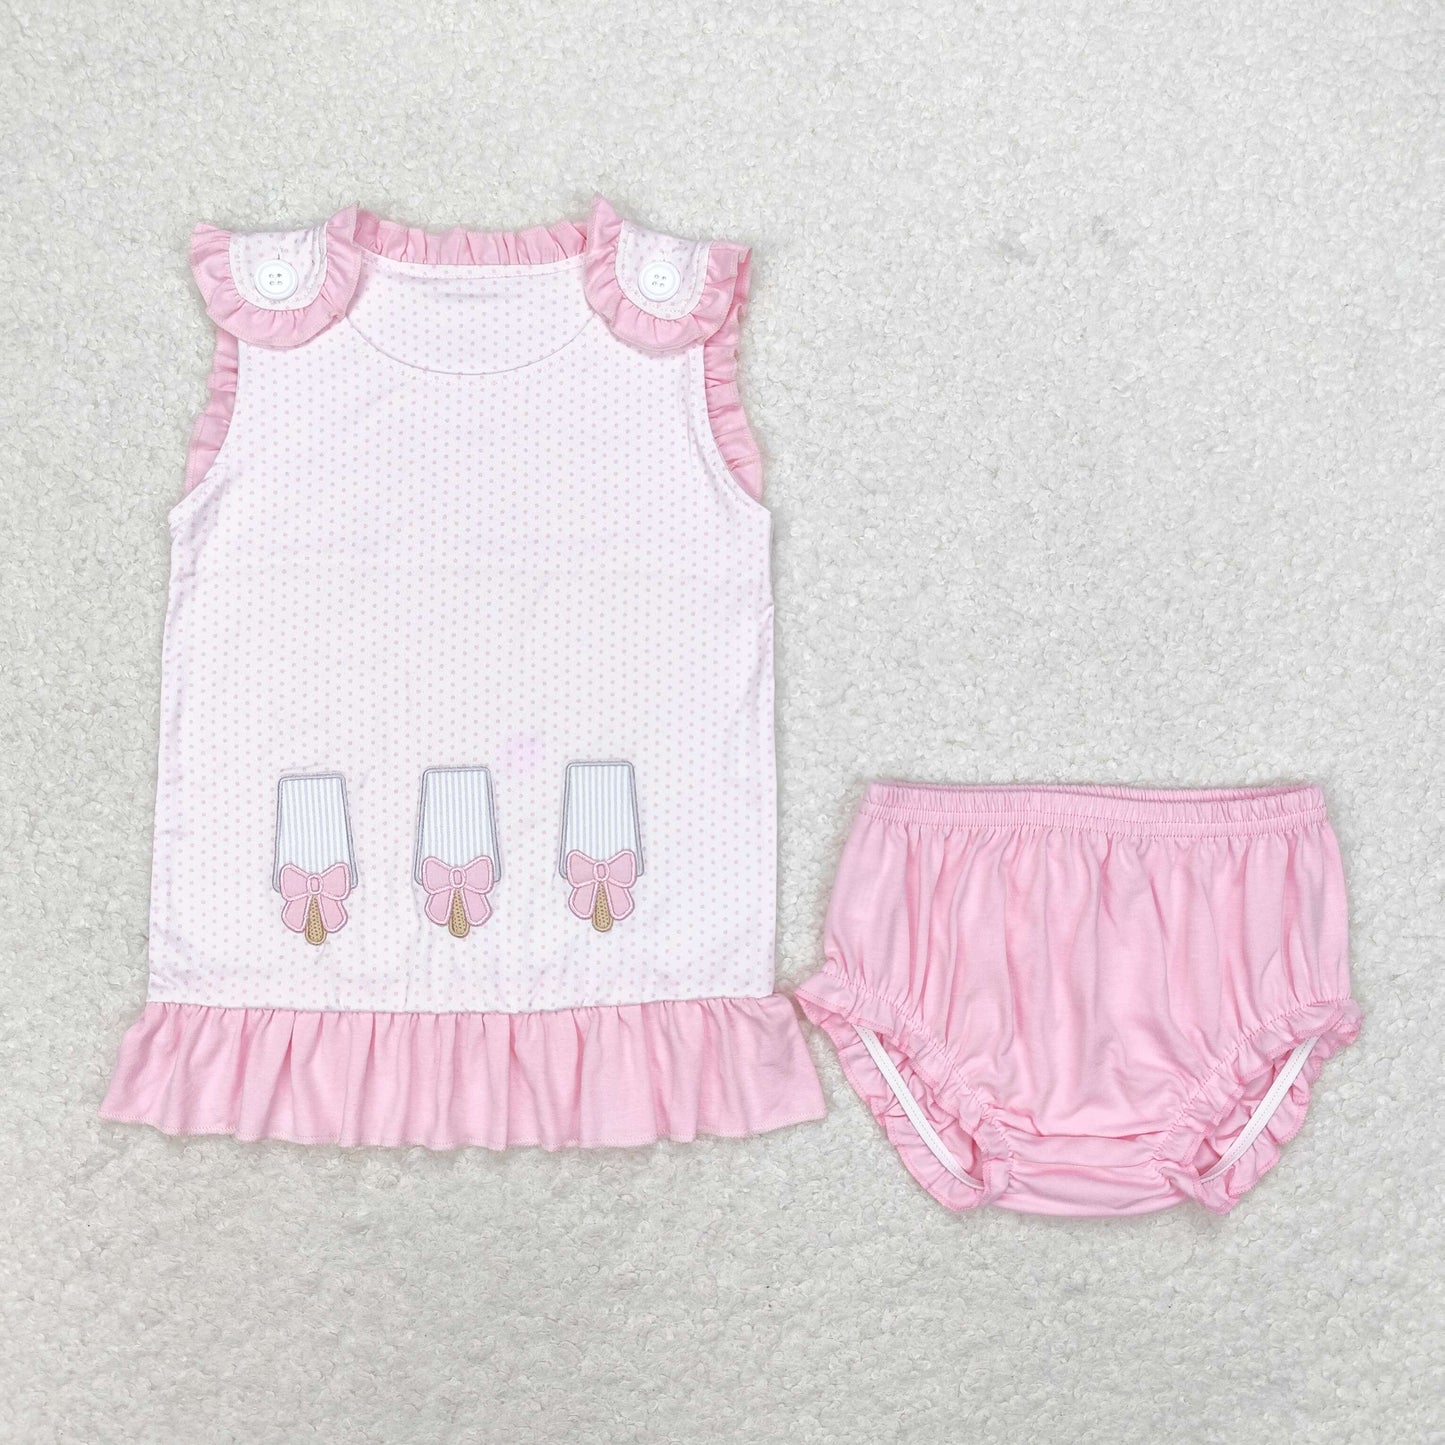 rts no moq GT0534+SS0240 Embroidered bow ice cream pink polka dot sleeveless top briefs sets